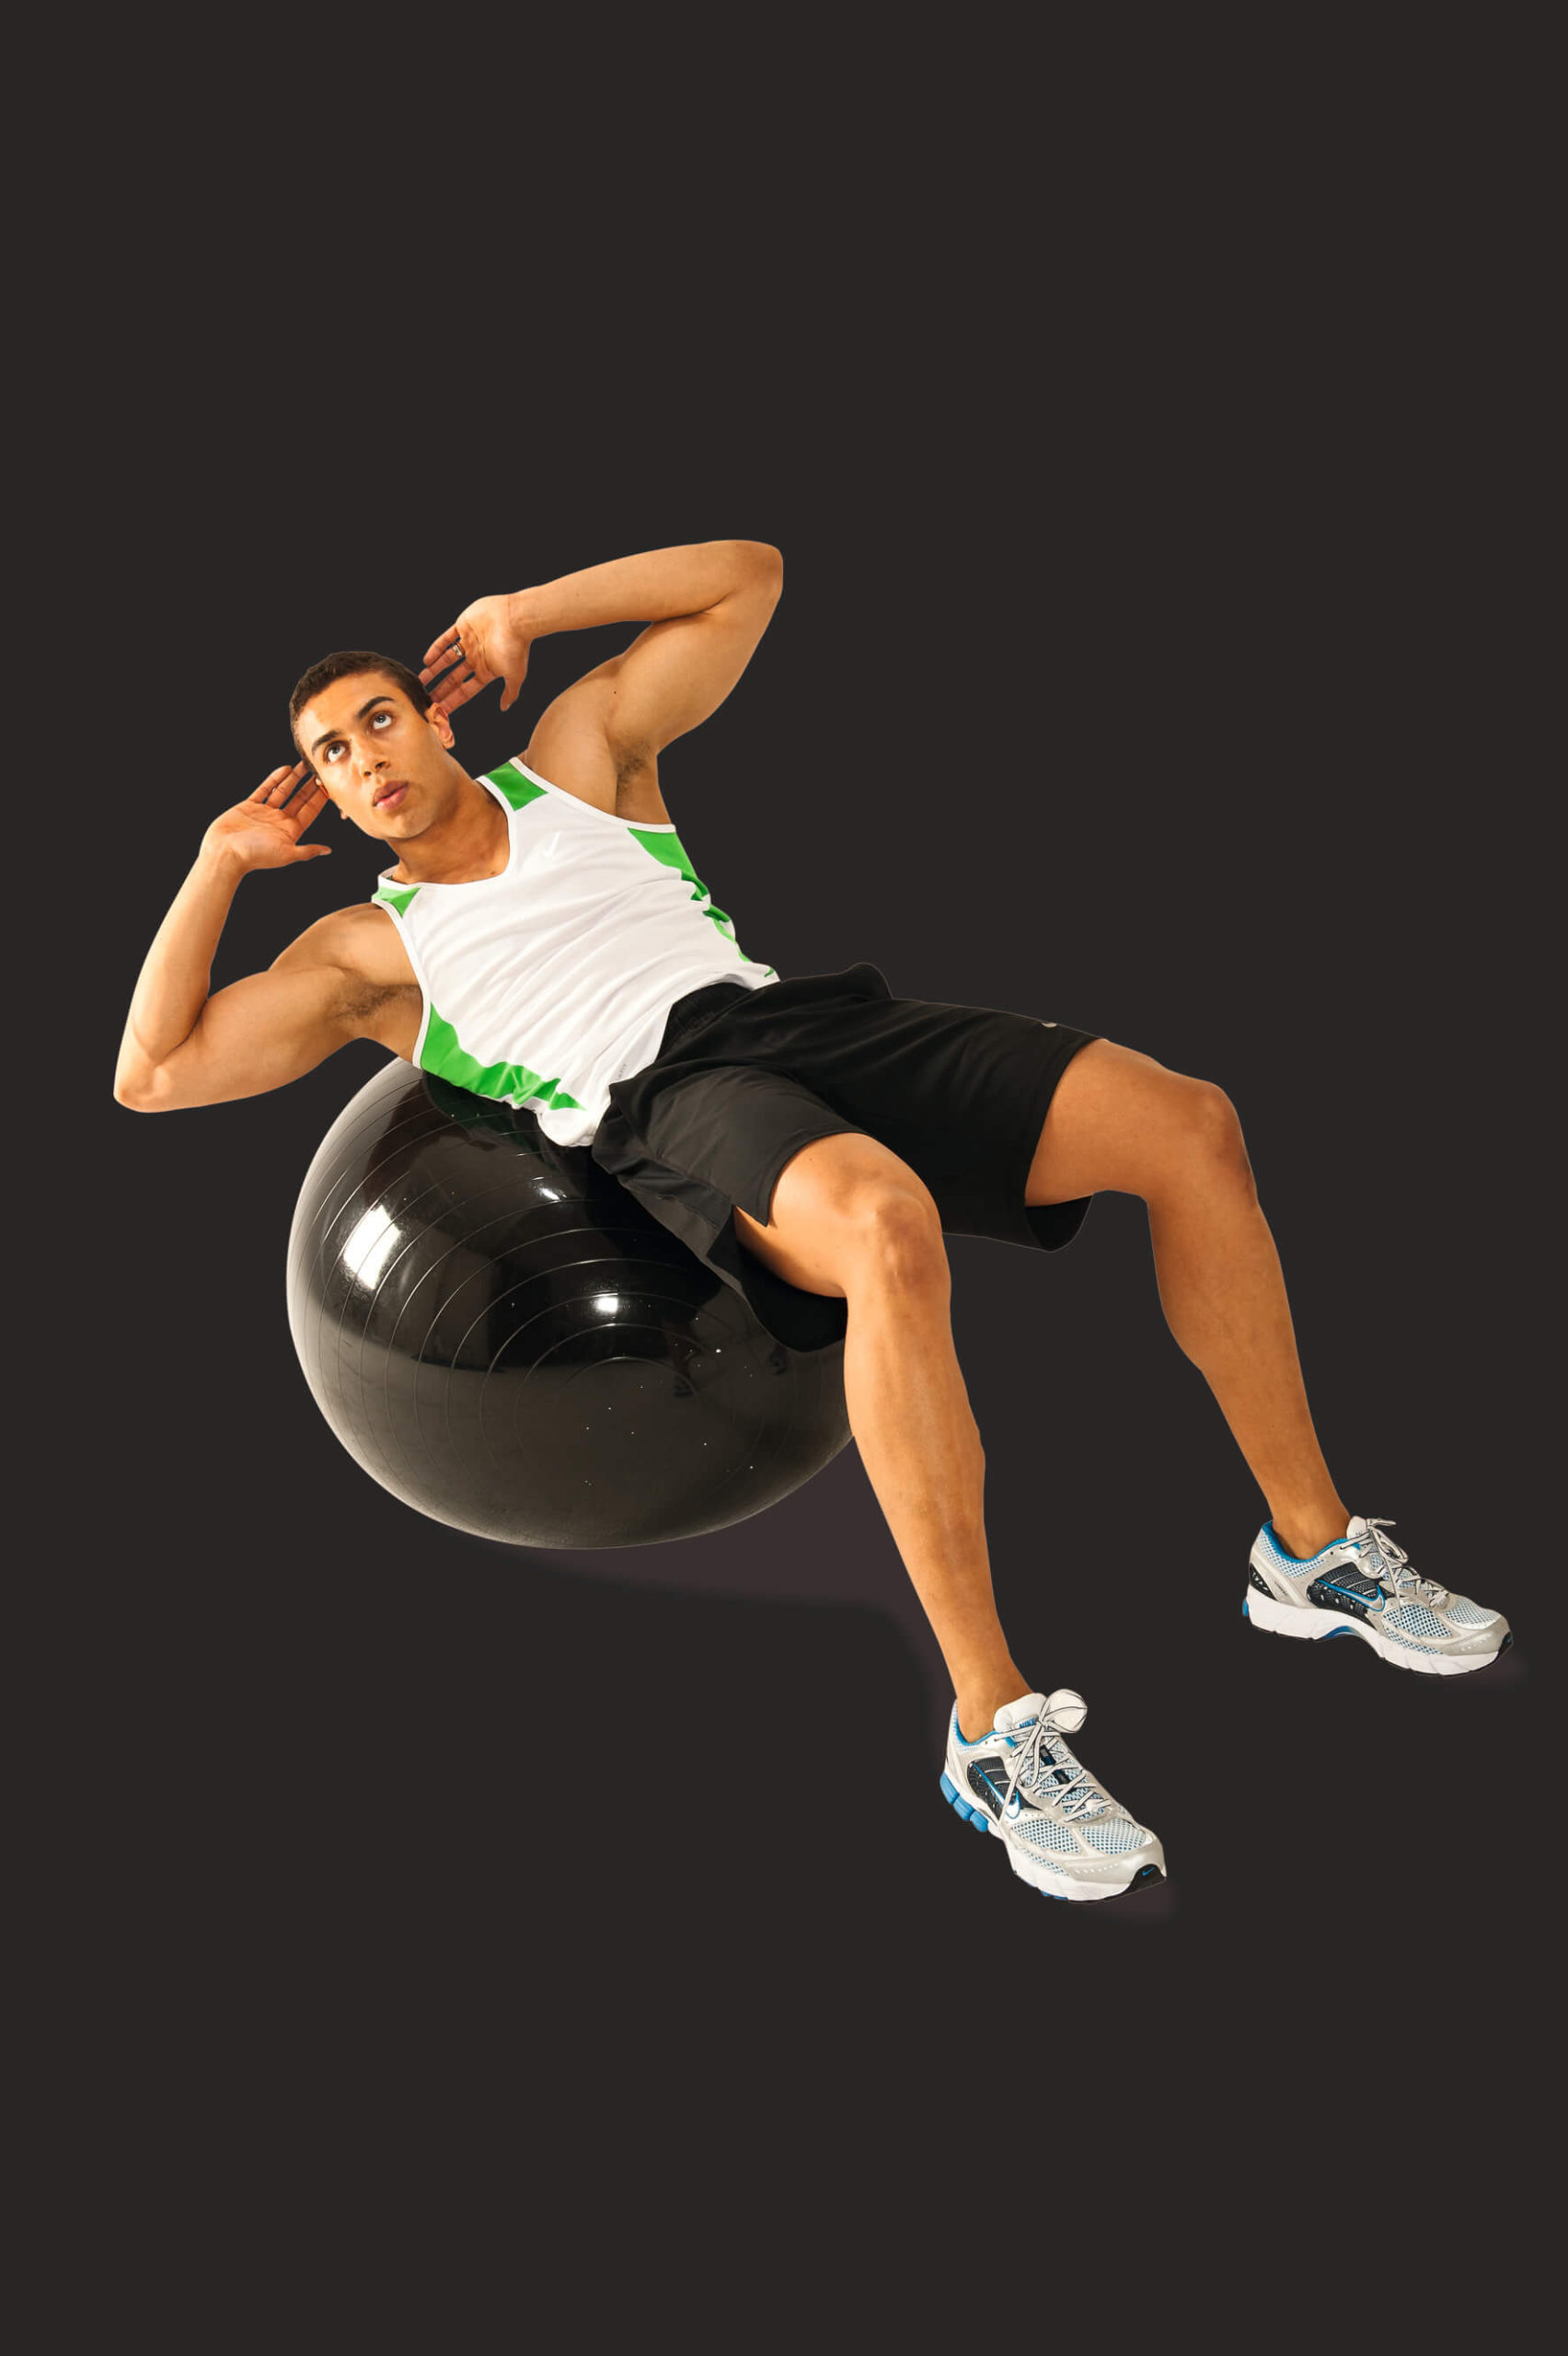 Get Fit In 15 With This Quick Swiss Ball Workout | Men's Fitness UK